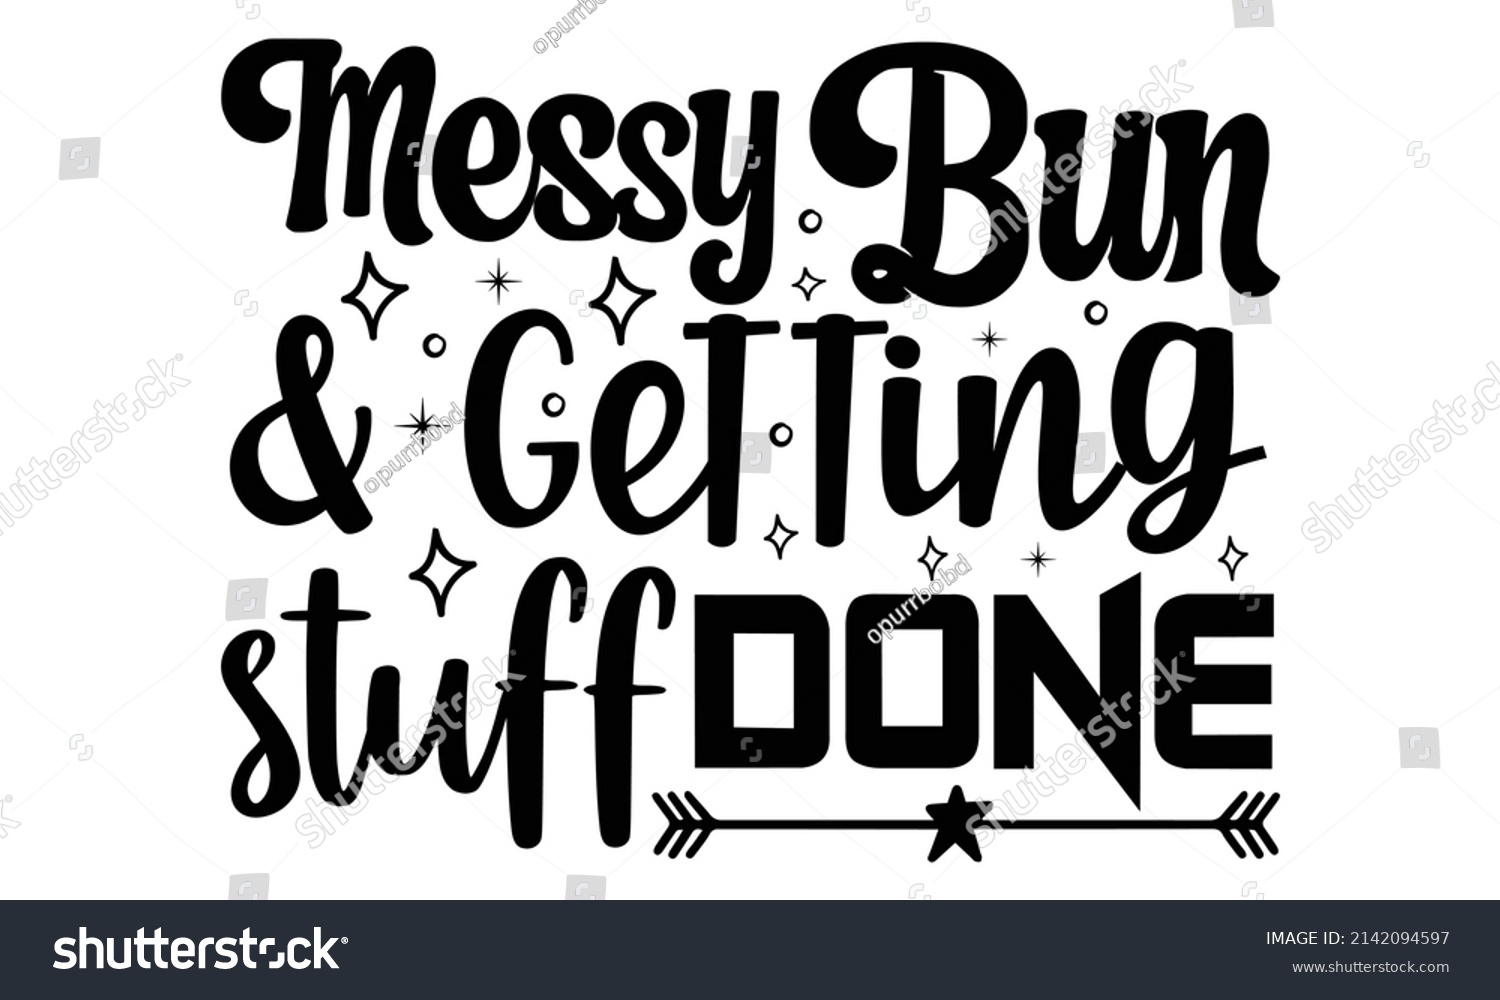 SVG of Messy bun  getting stuff done- Mother's day t-shirt design, Hand drawn lettering phrase, Calligraphy t-shirt design, Isolated on white background, Handwritten vector sign, SVG, EPS 10 svg